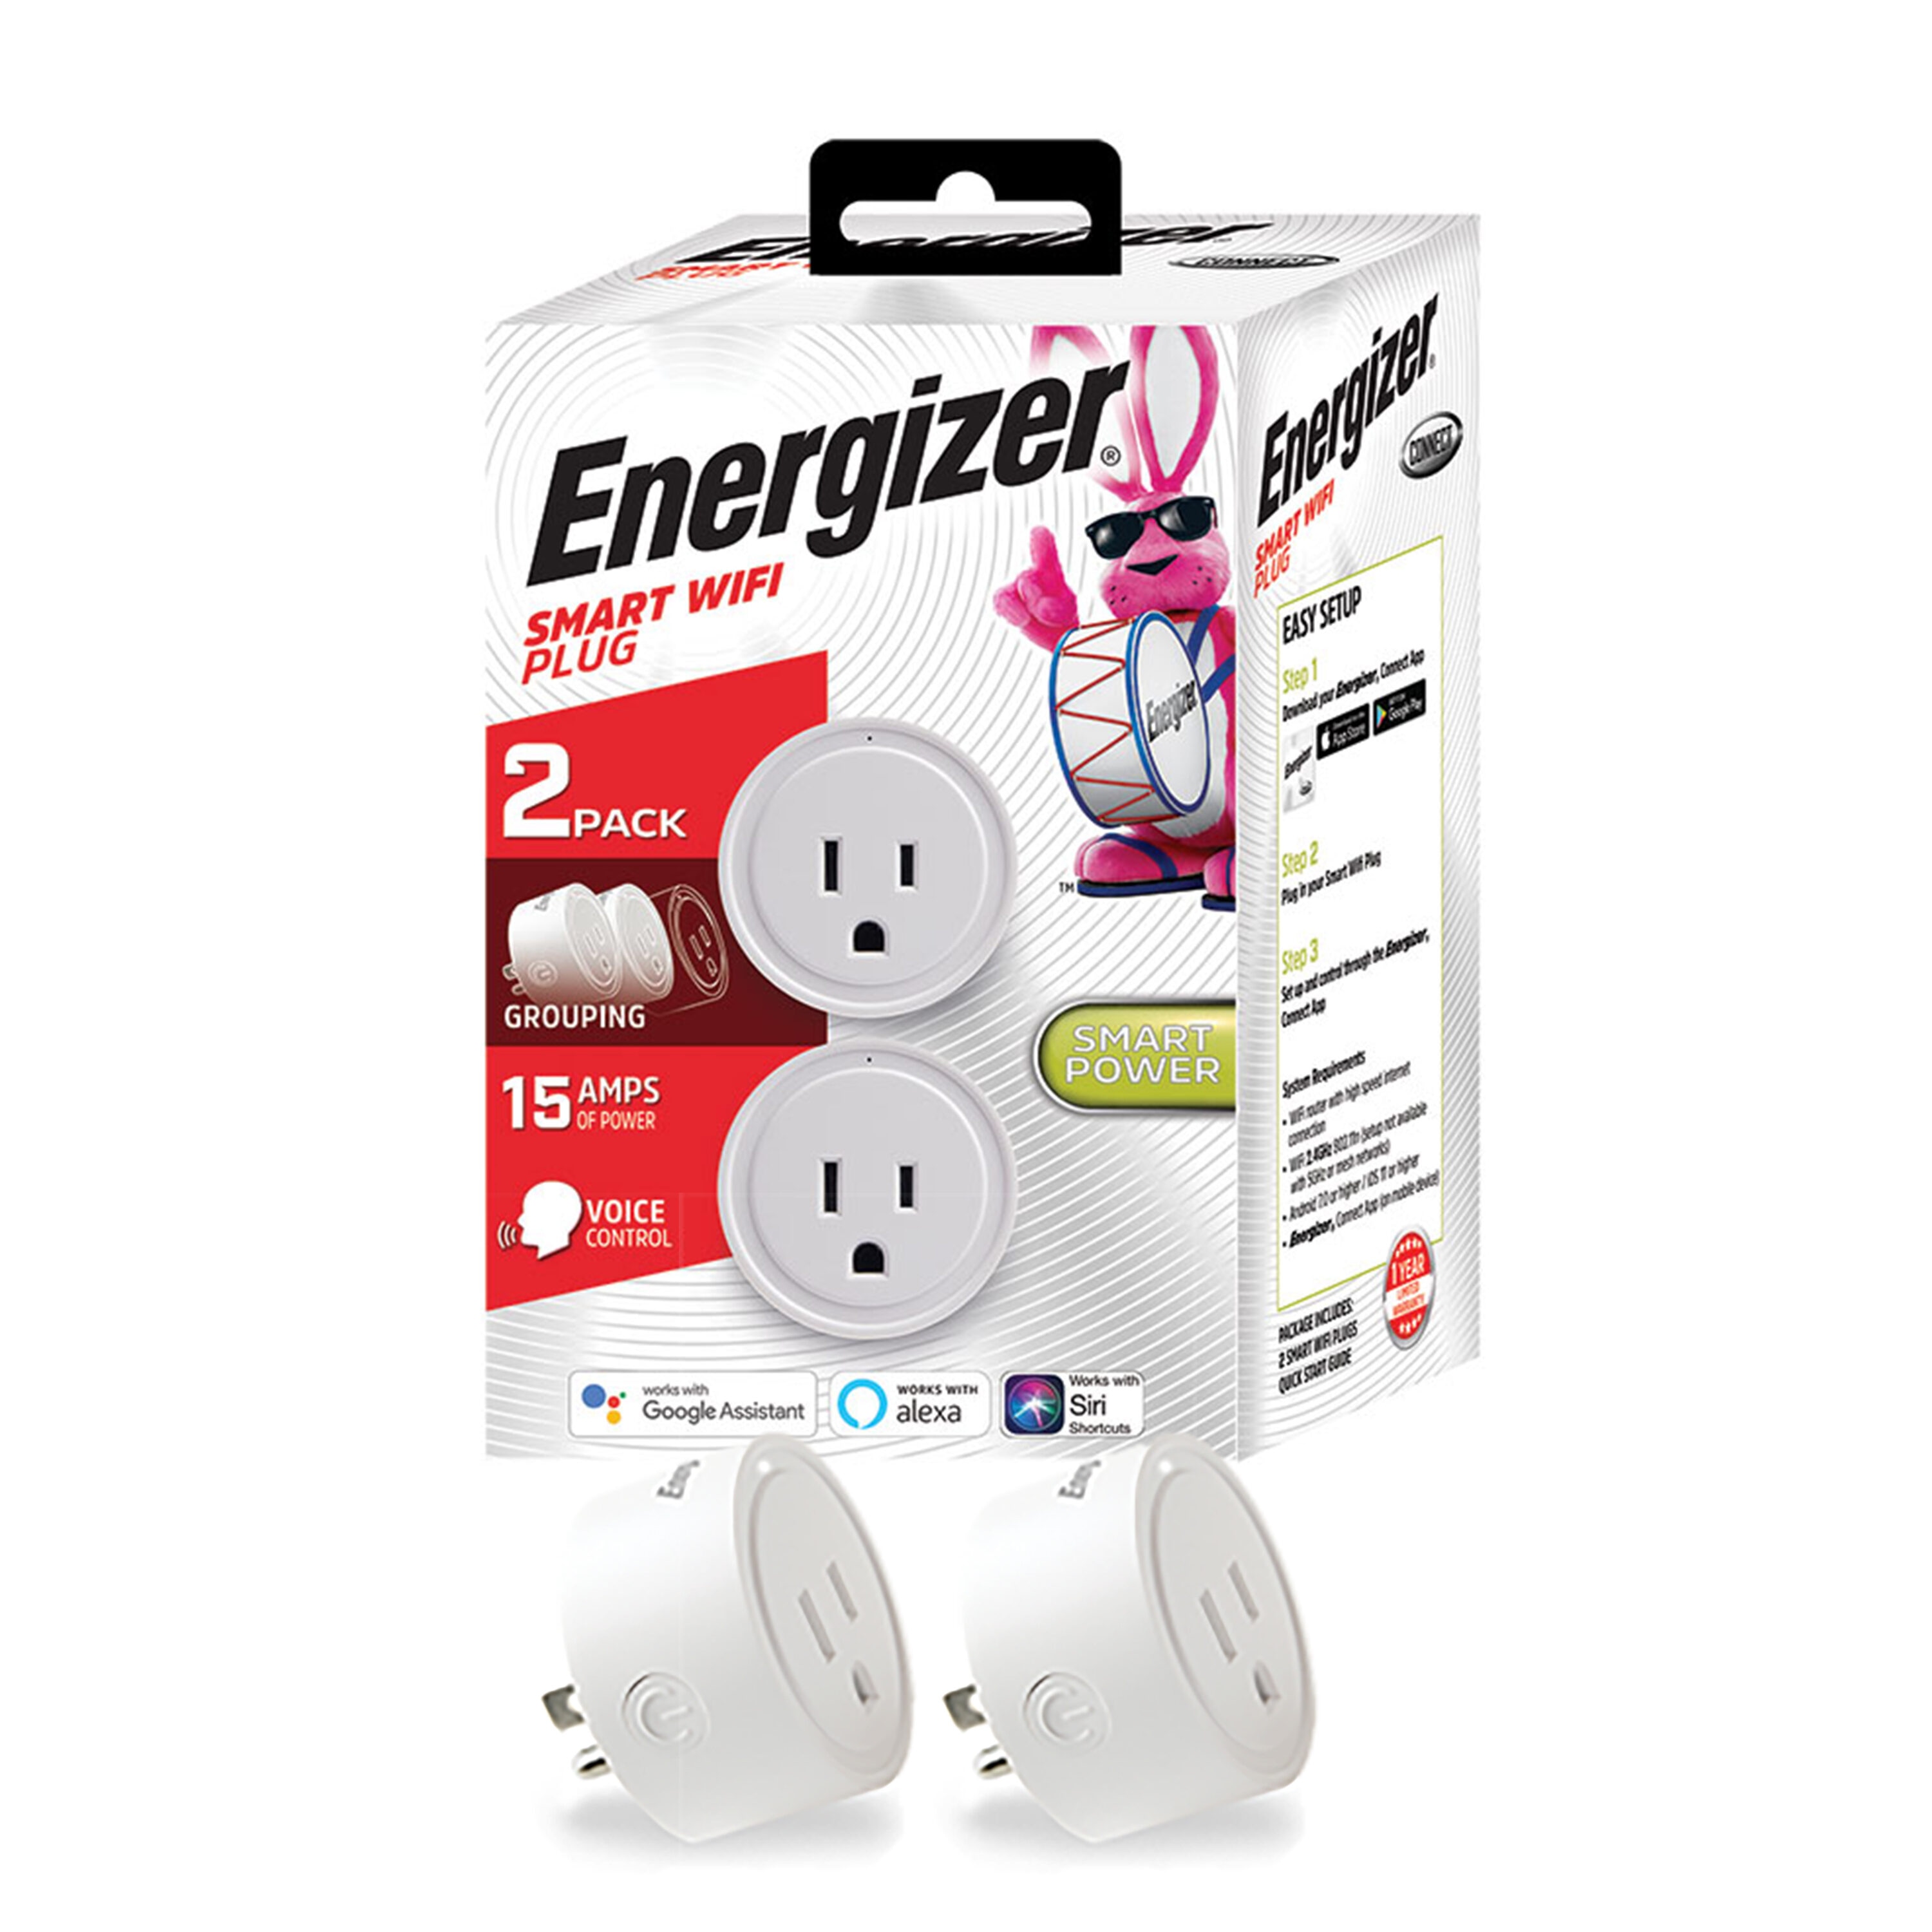 GE Cync 120-Volt 1-Outlet Indoor Smart Plug in the Smart Plugs department  at